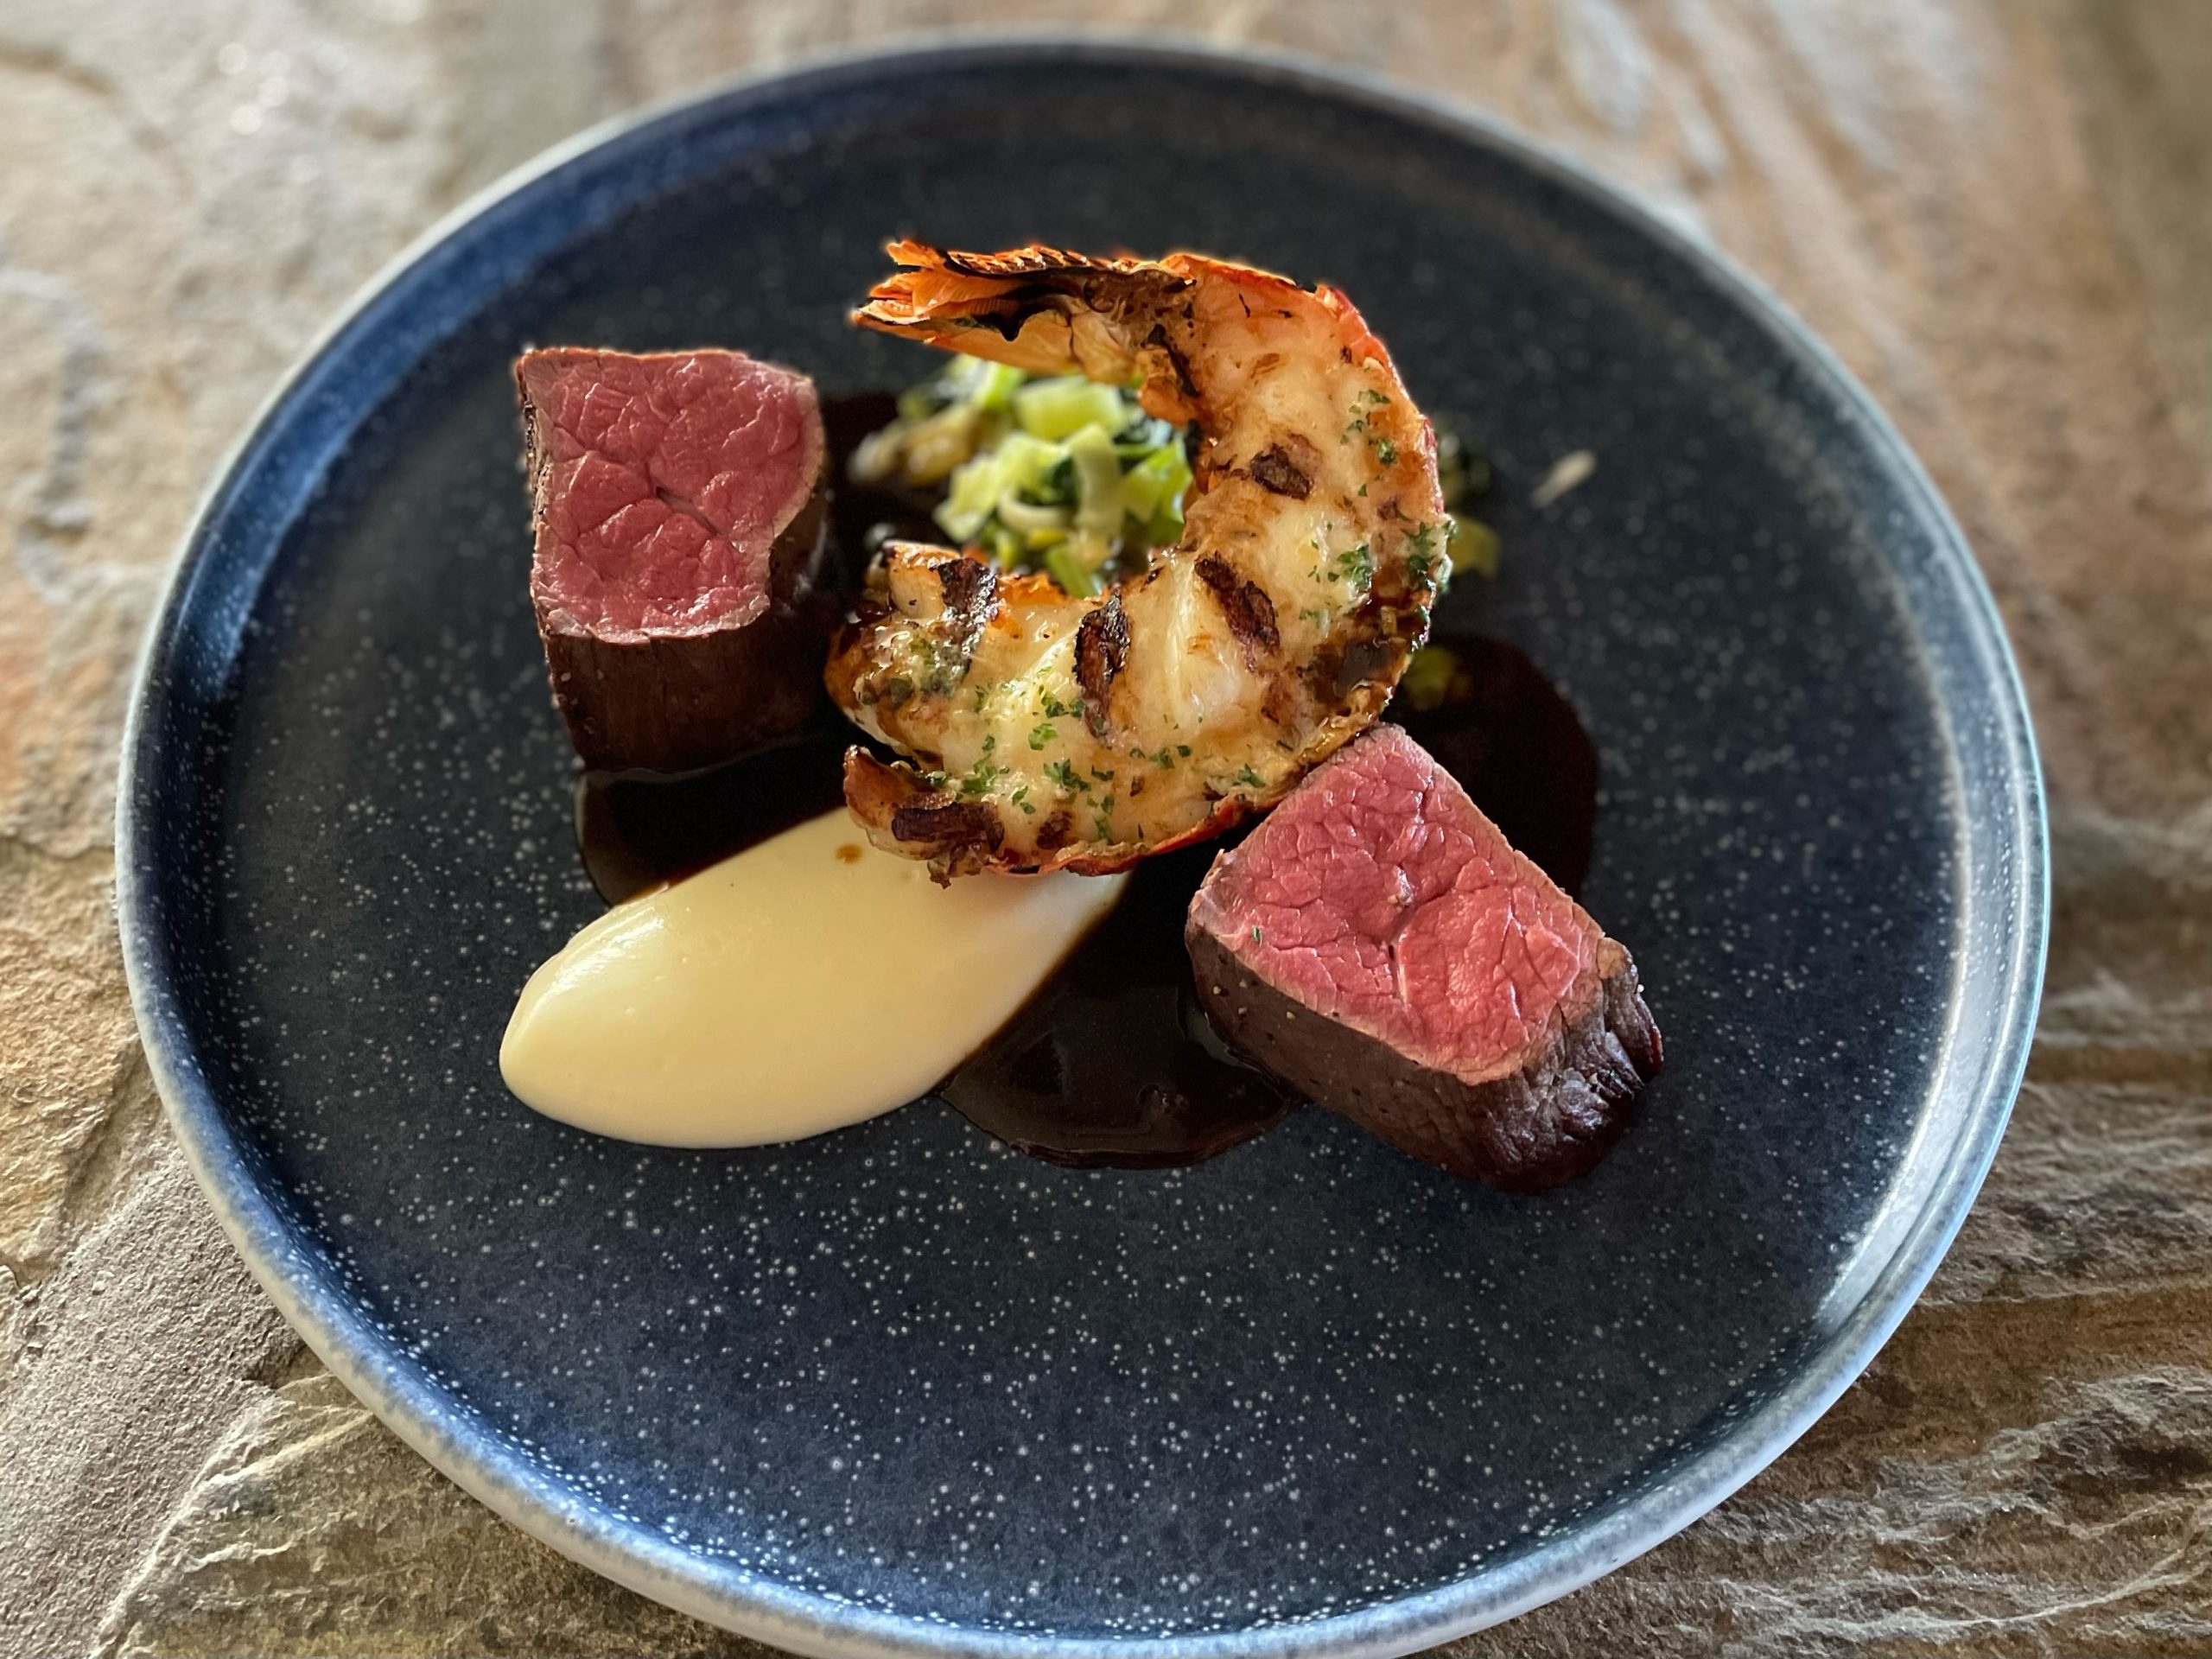 Fat duck surf and turf scaled - Wild Fiordland Surf & Turf - Murihiku on a Plate